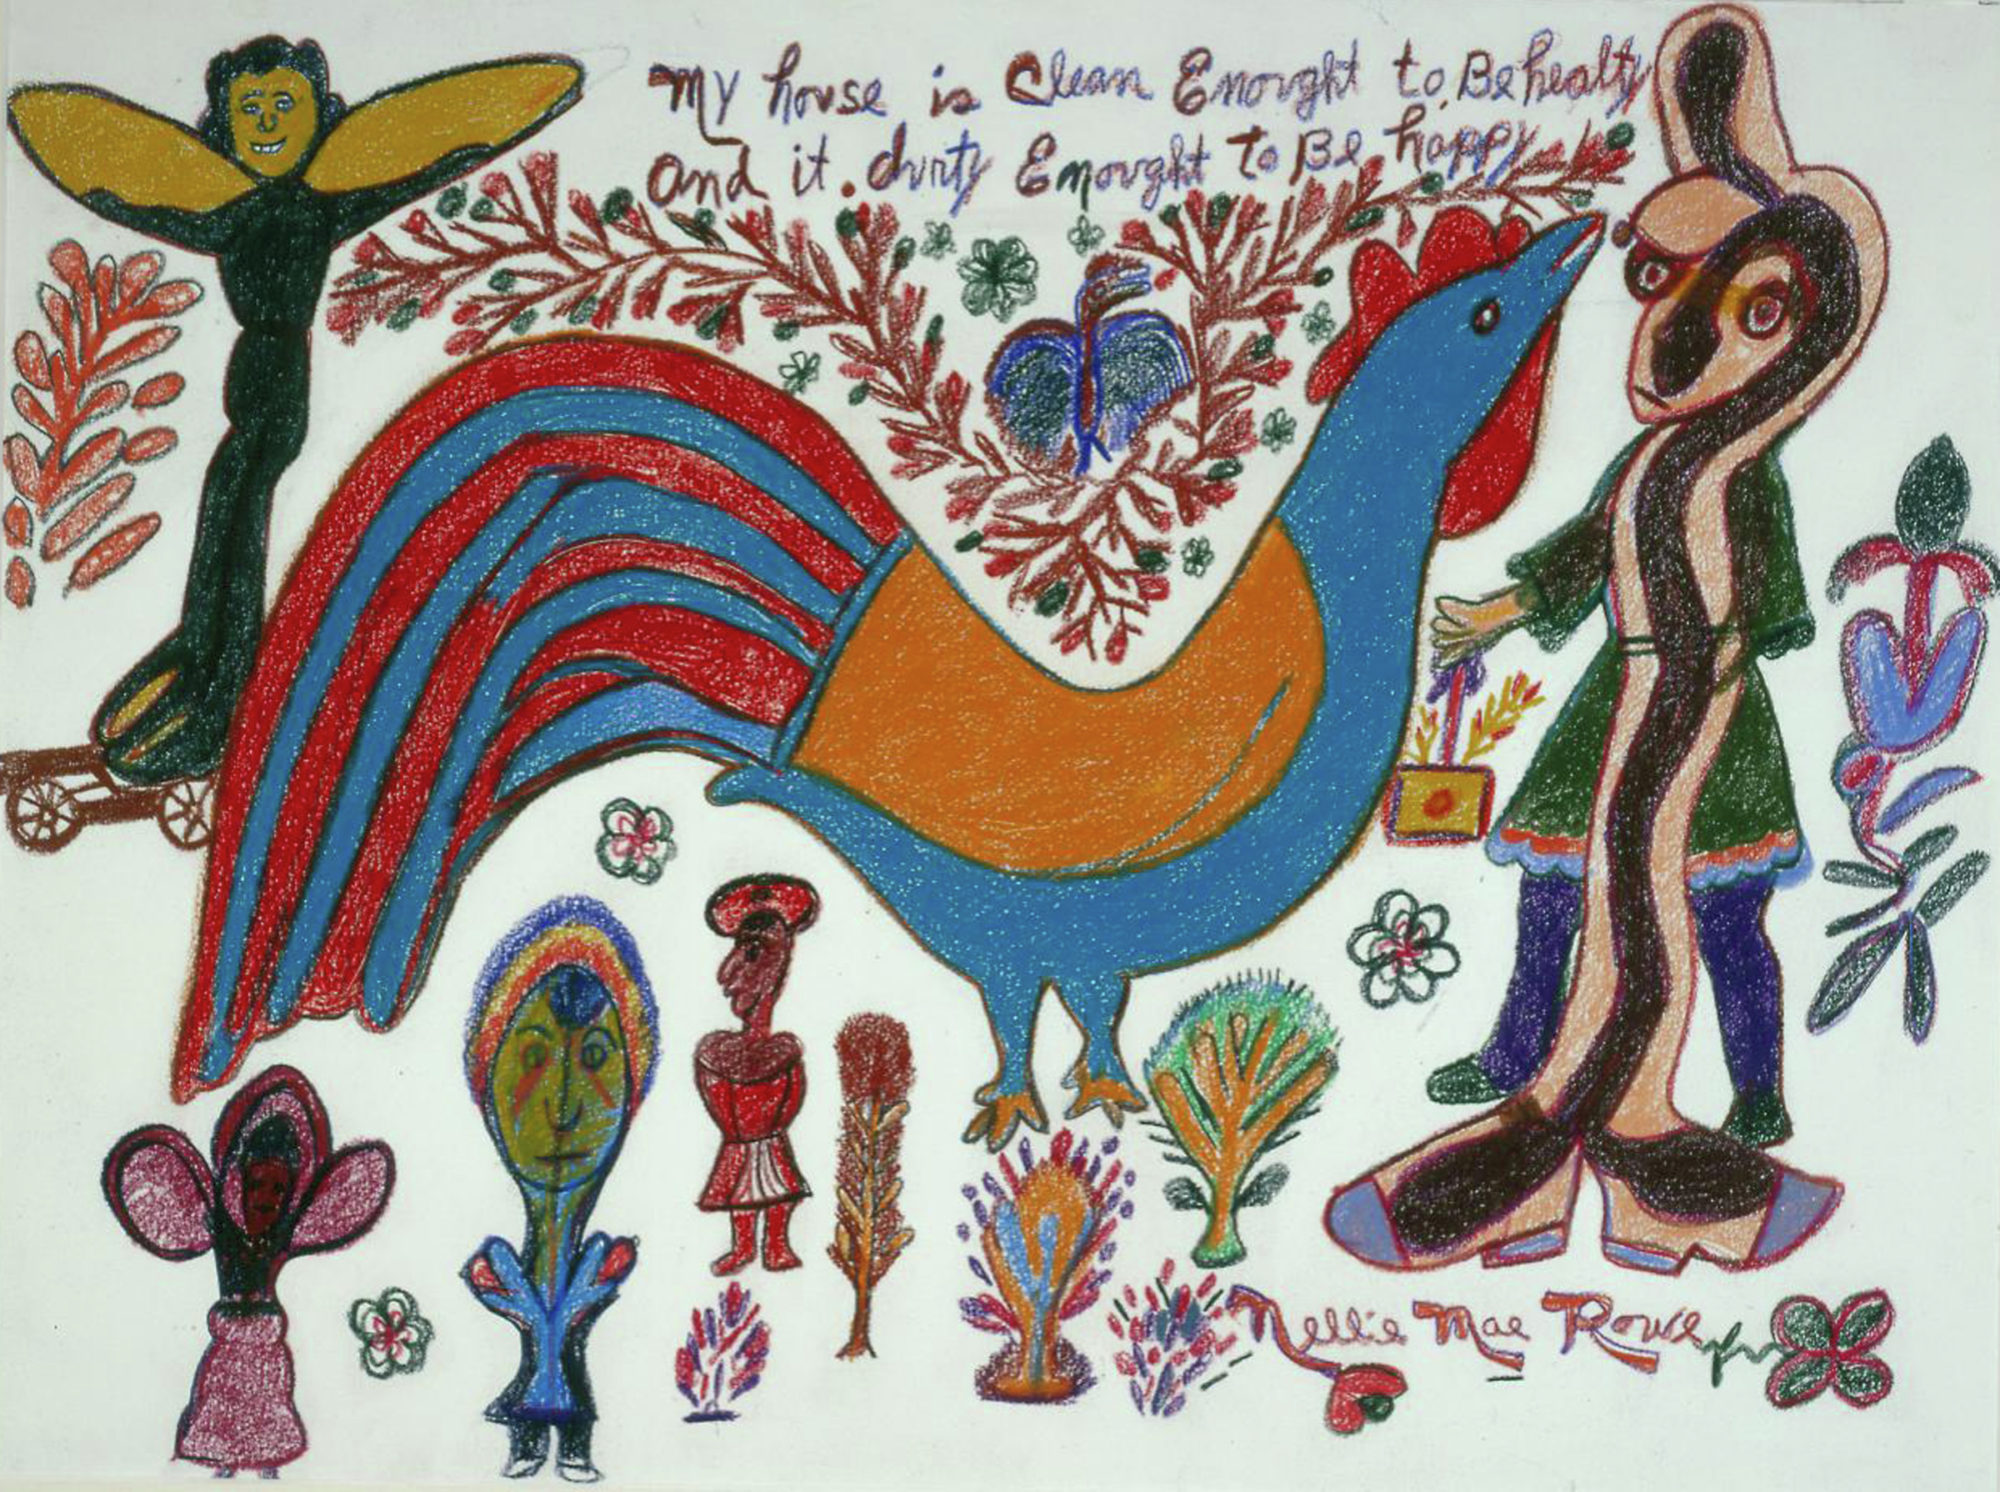 Colorful crayon on paper drawing by artist Nellie Mae Rowe. The background is white, and there are several figures throughout the composition. At the centre of the composition is a large blue and red rooster. The work is titled in crayon at the top of the drawing.